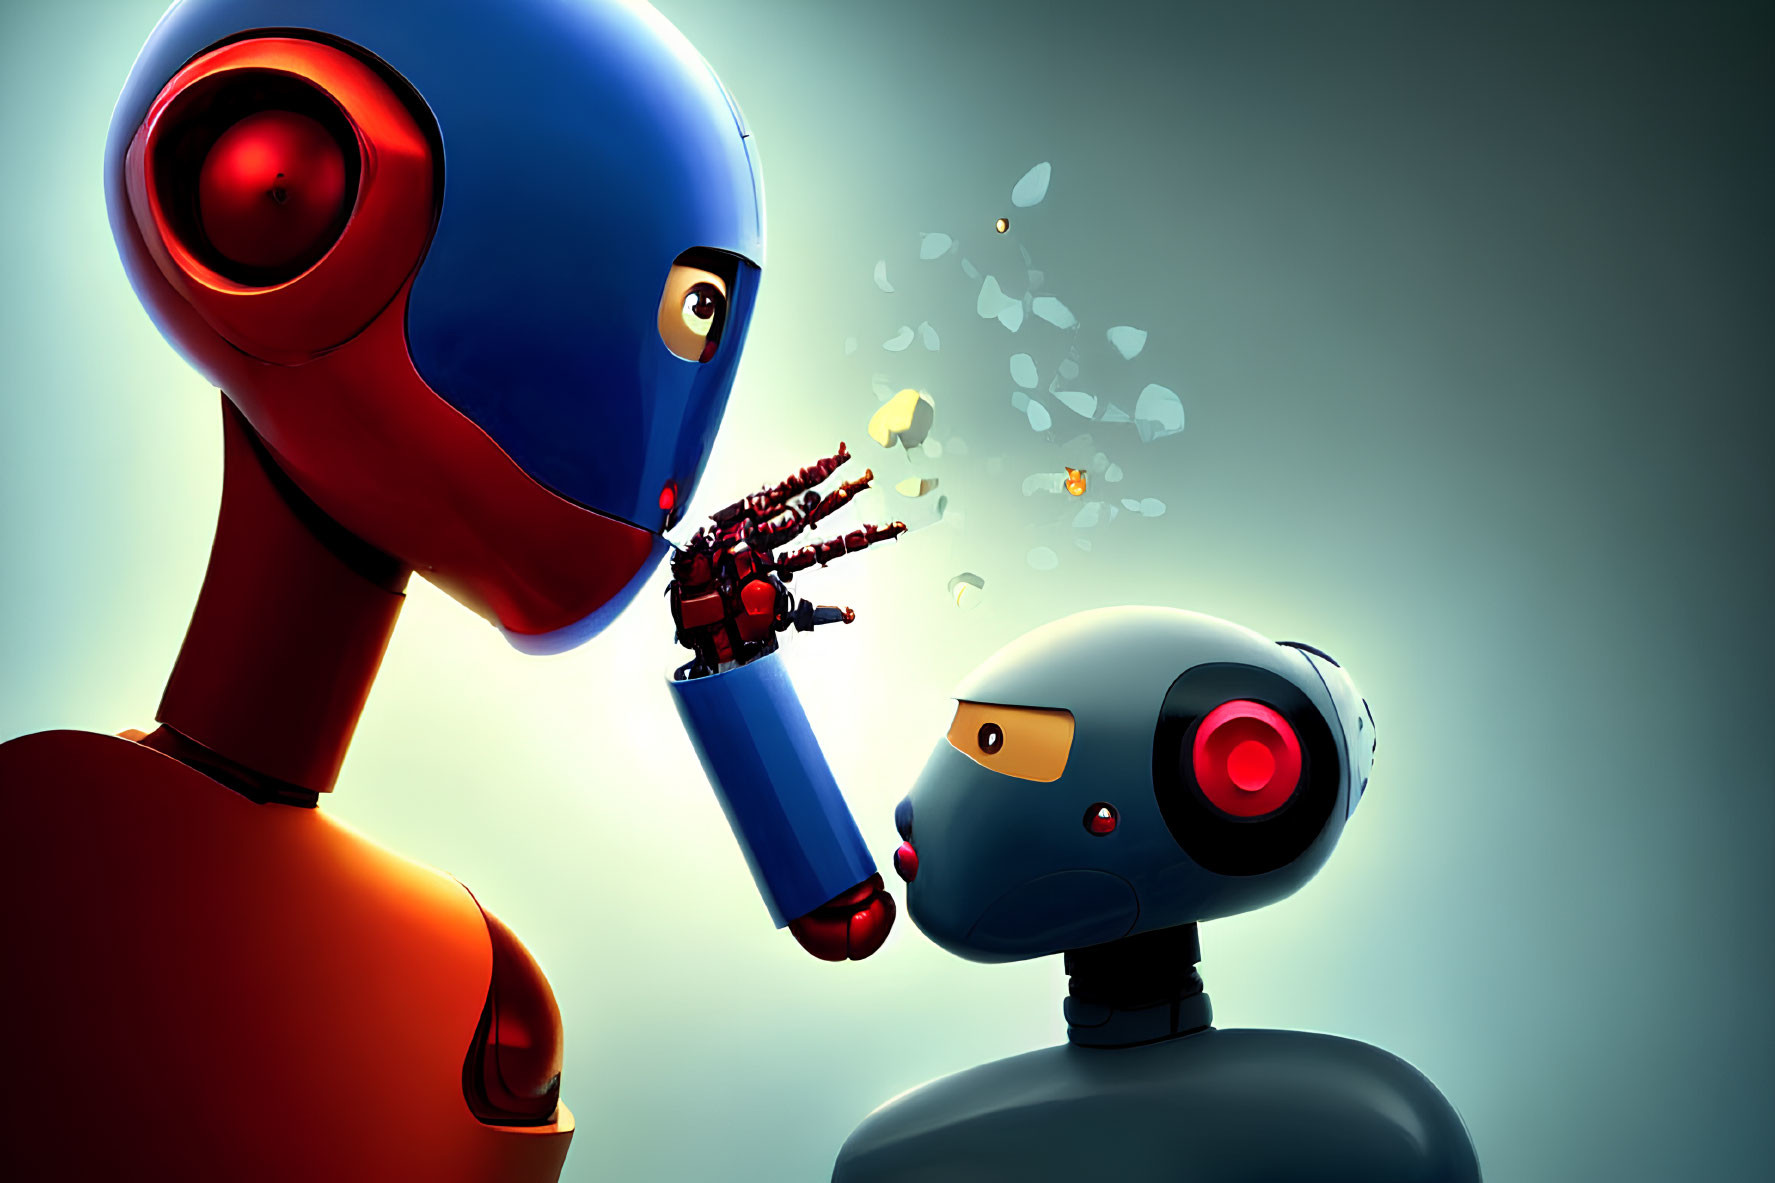 Stylized robots blowing digital bubbles - red accents on larger robot, black and red features on smaller